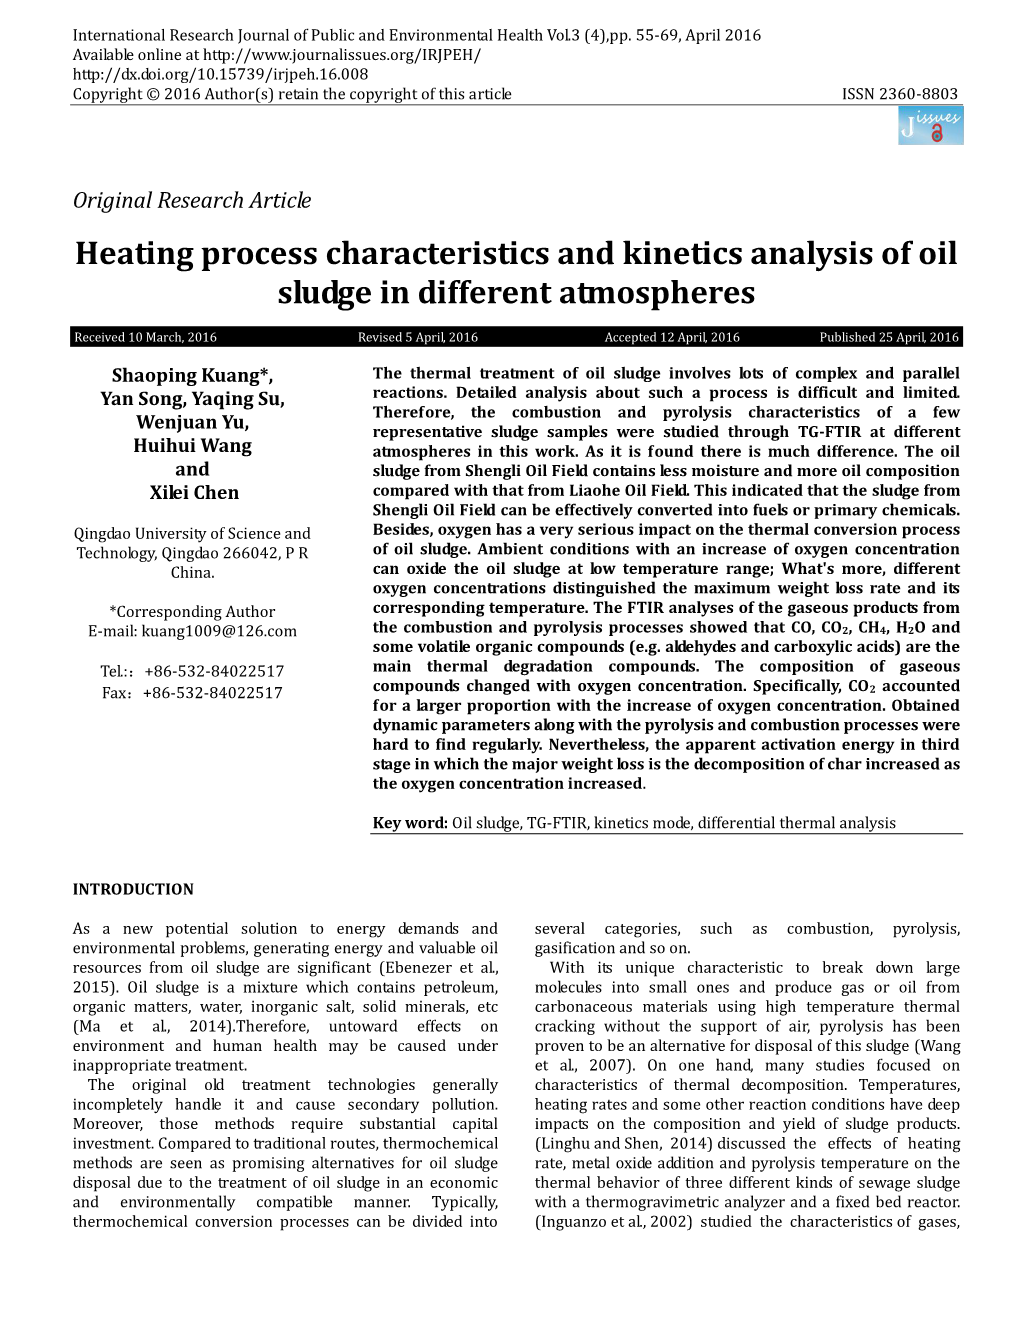 Heating Process Characteristics and Kinetics Analysis of Oil Sludge in Different Atmospheres